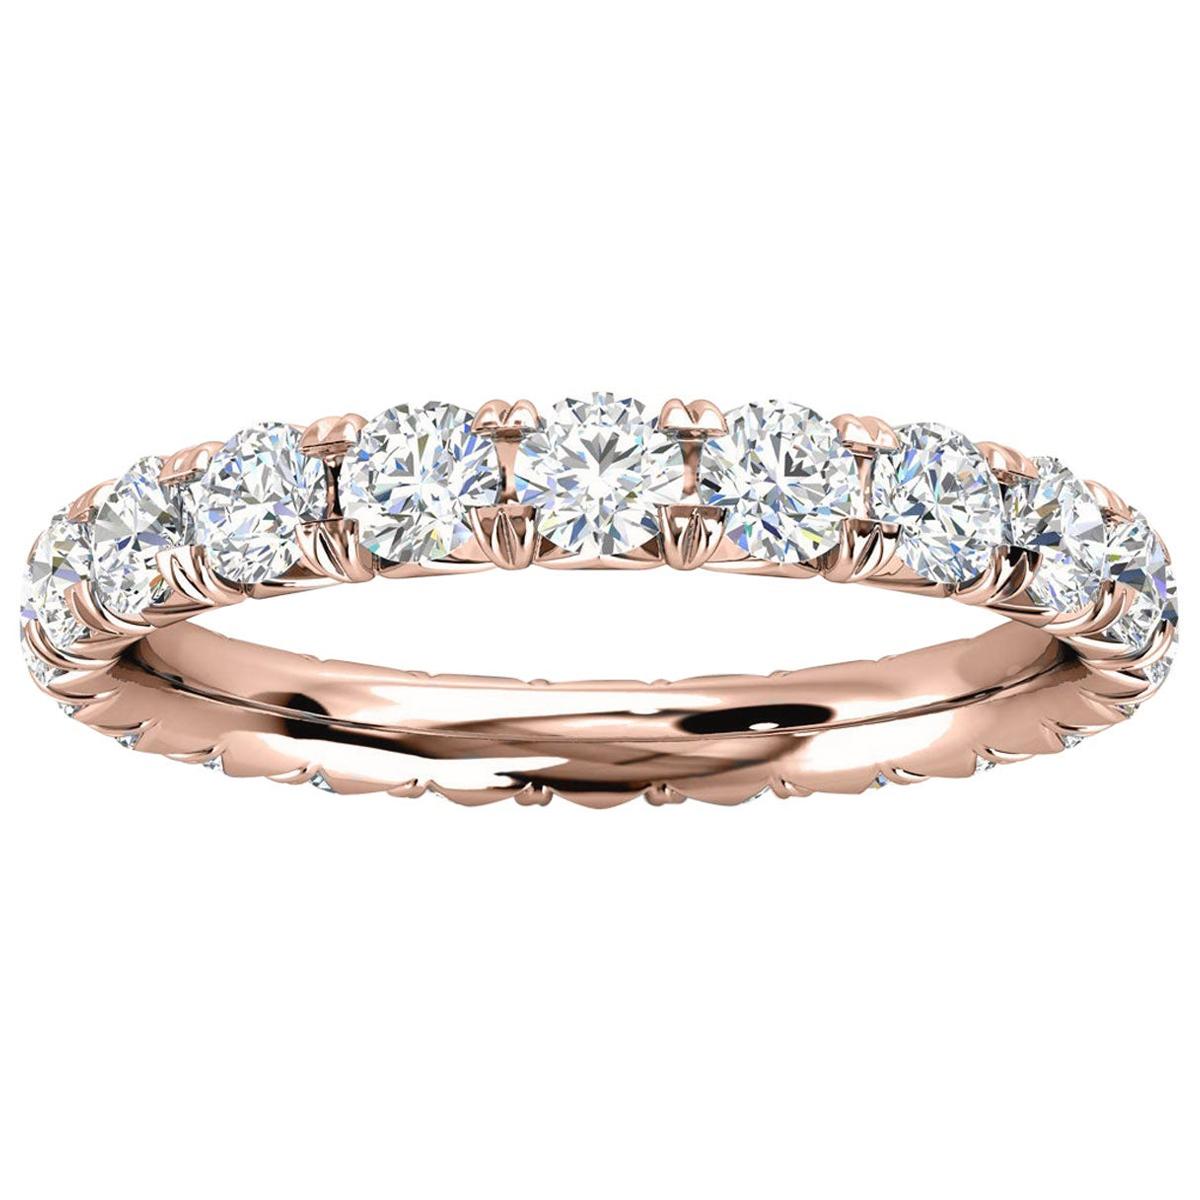 18k Rose Gold Mia French Pave Diamond Eternity Ring '1 1/2 Ct. tw'